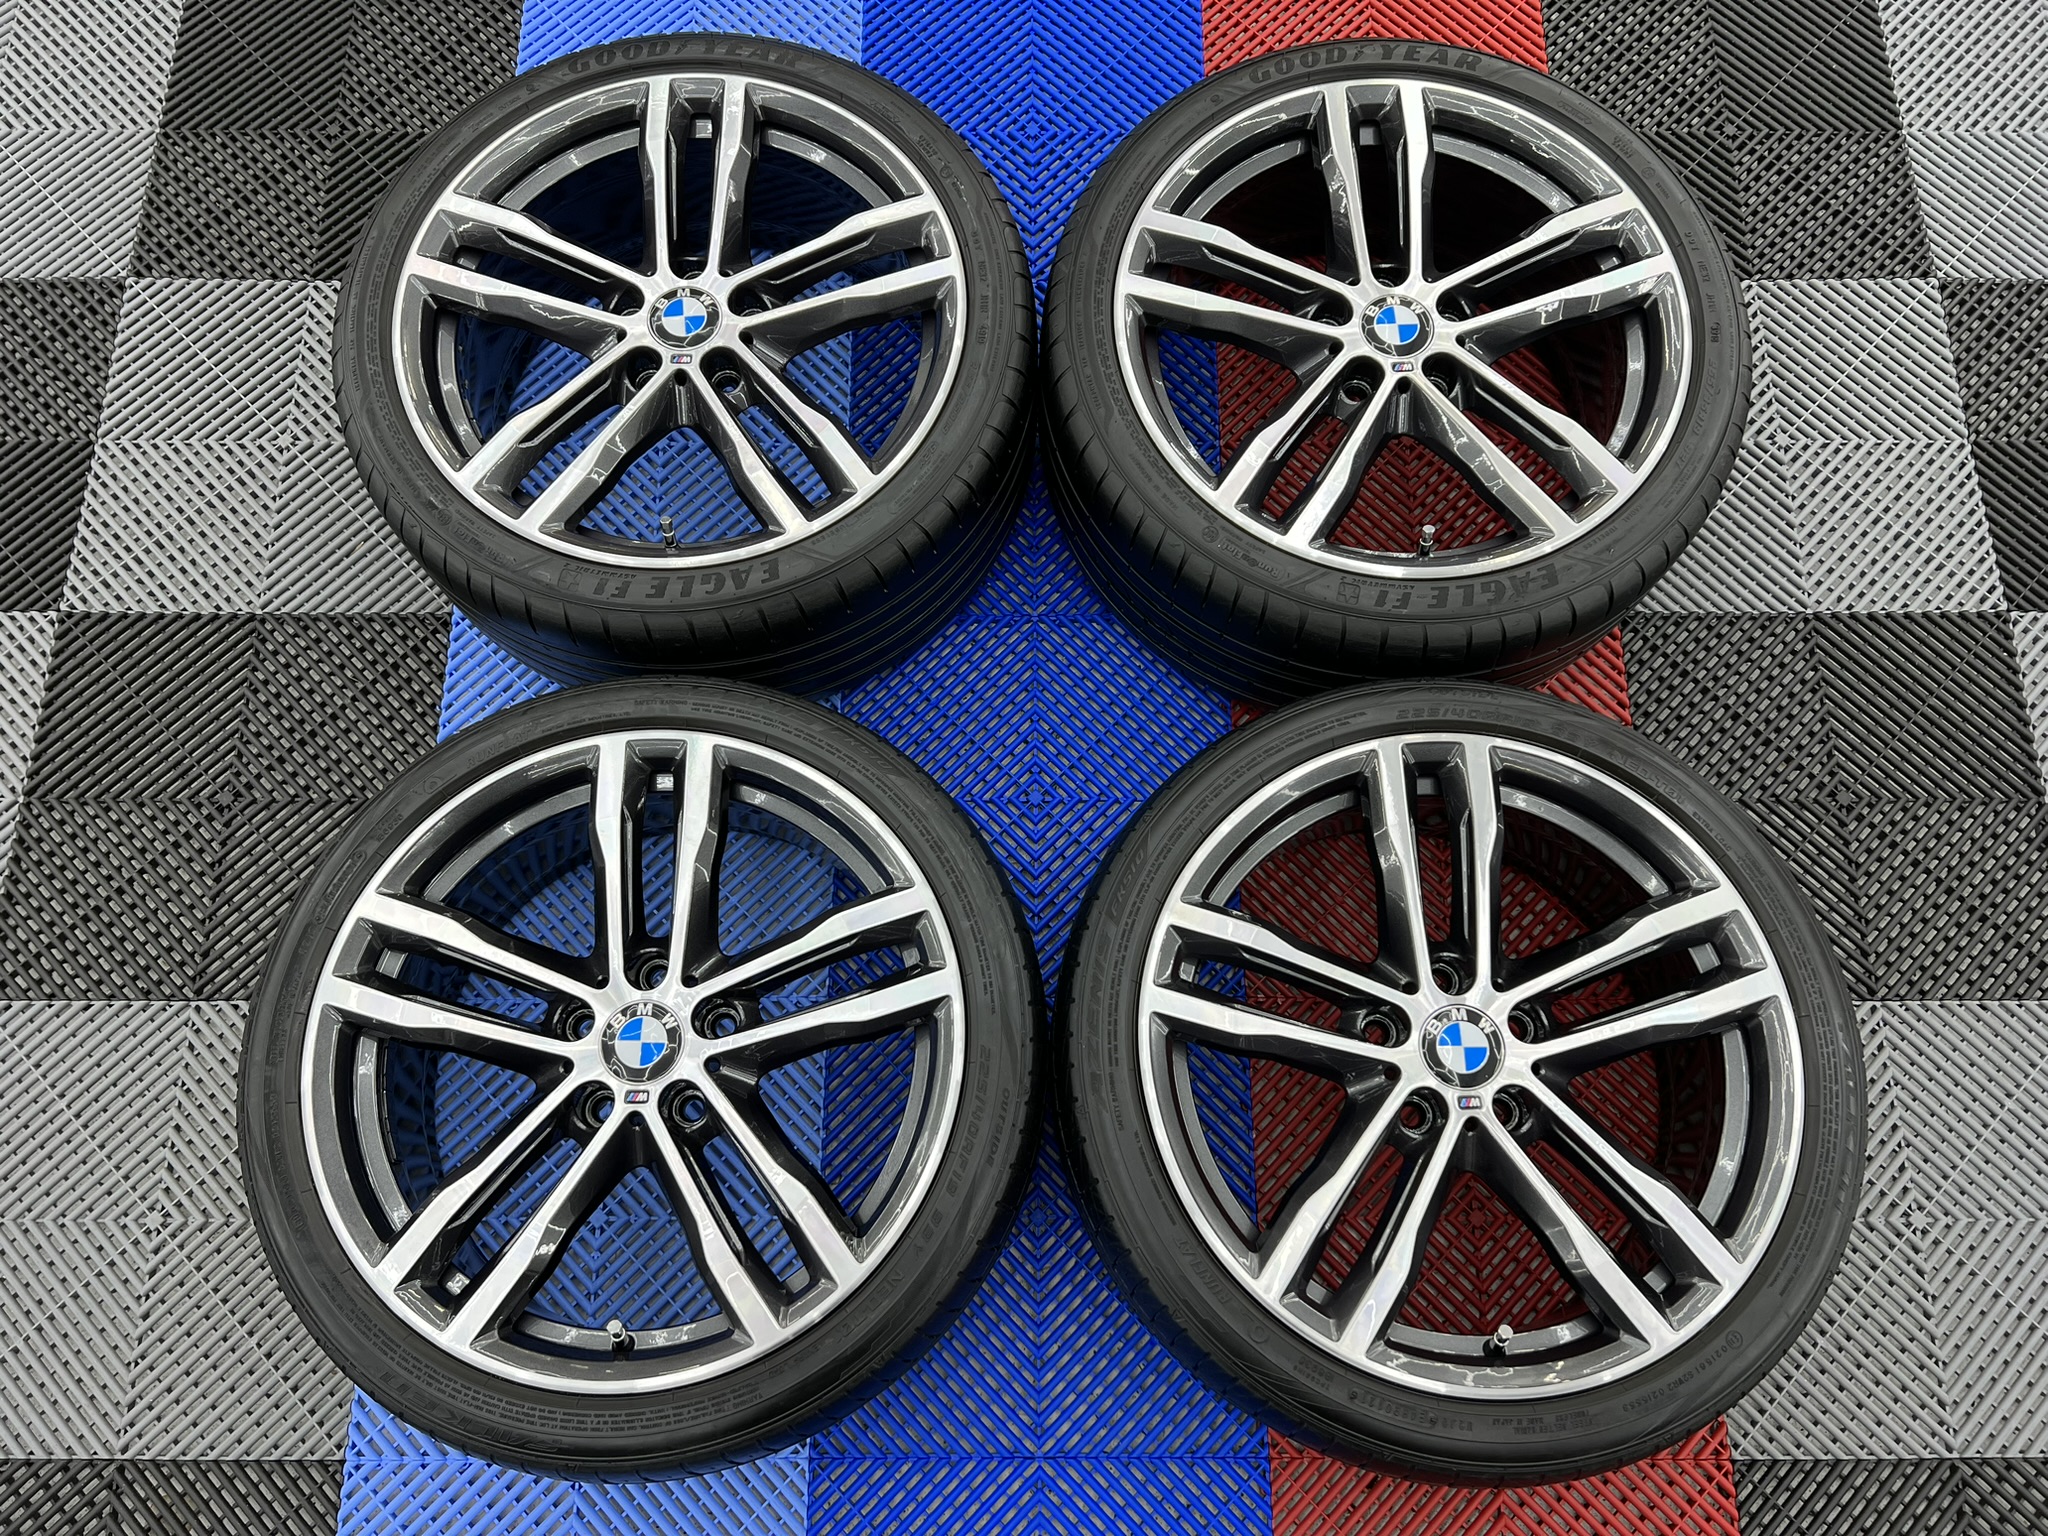 USED 19" GENUINE BMW STYLE 704 M SPORT ALLOY WHEELS,FULLY REFURBISHED ,WIDE REAR INC RUNFLAT TYRES